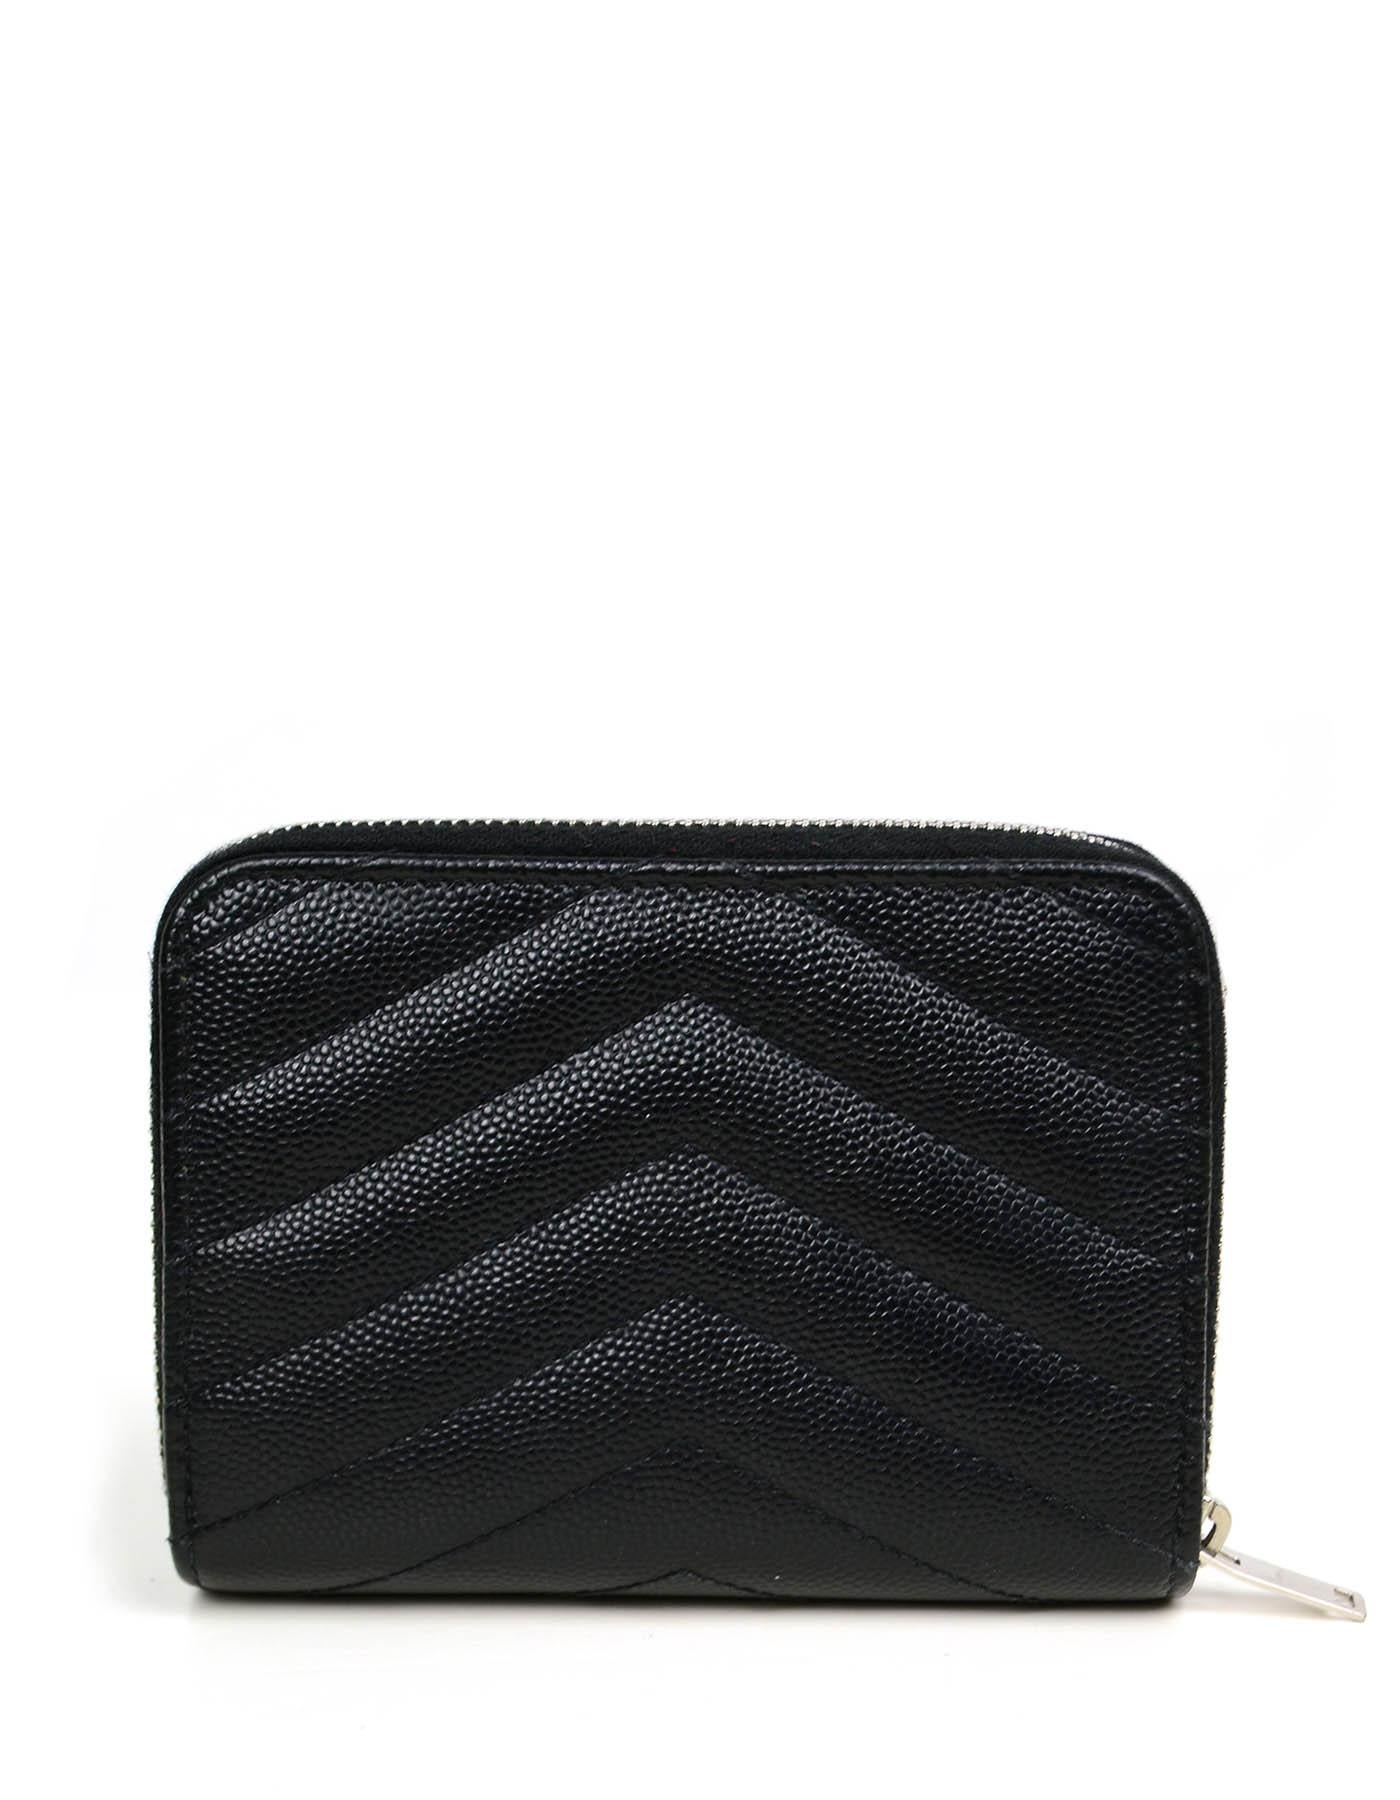 Saint Laurent Monogram Chevron Leather Compact Zip Around Wallet

Made In: Italy
Color: Black
Hardware: Silvertone
Materials: Grained leather
Lining: Grained leather
Closure/Opening: Snap and zip around
Exterior Pockets: Zip around coin